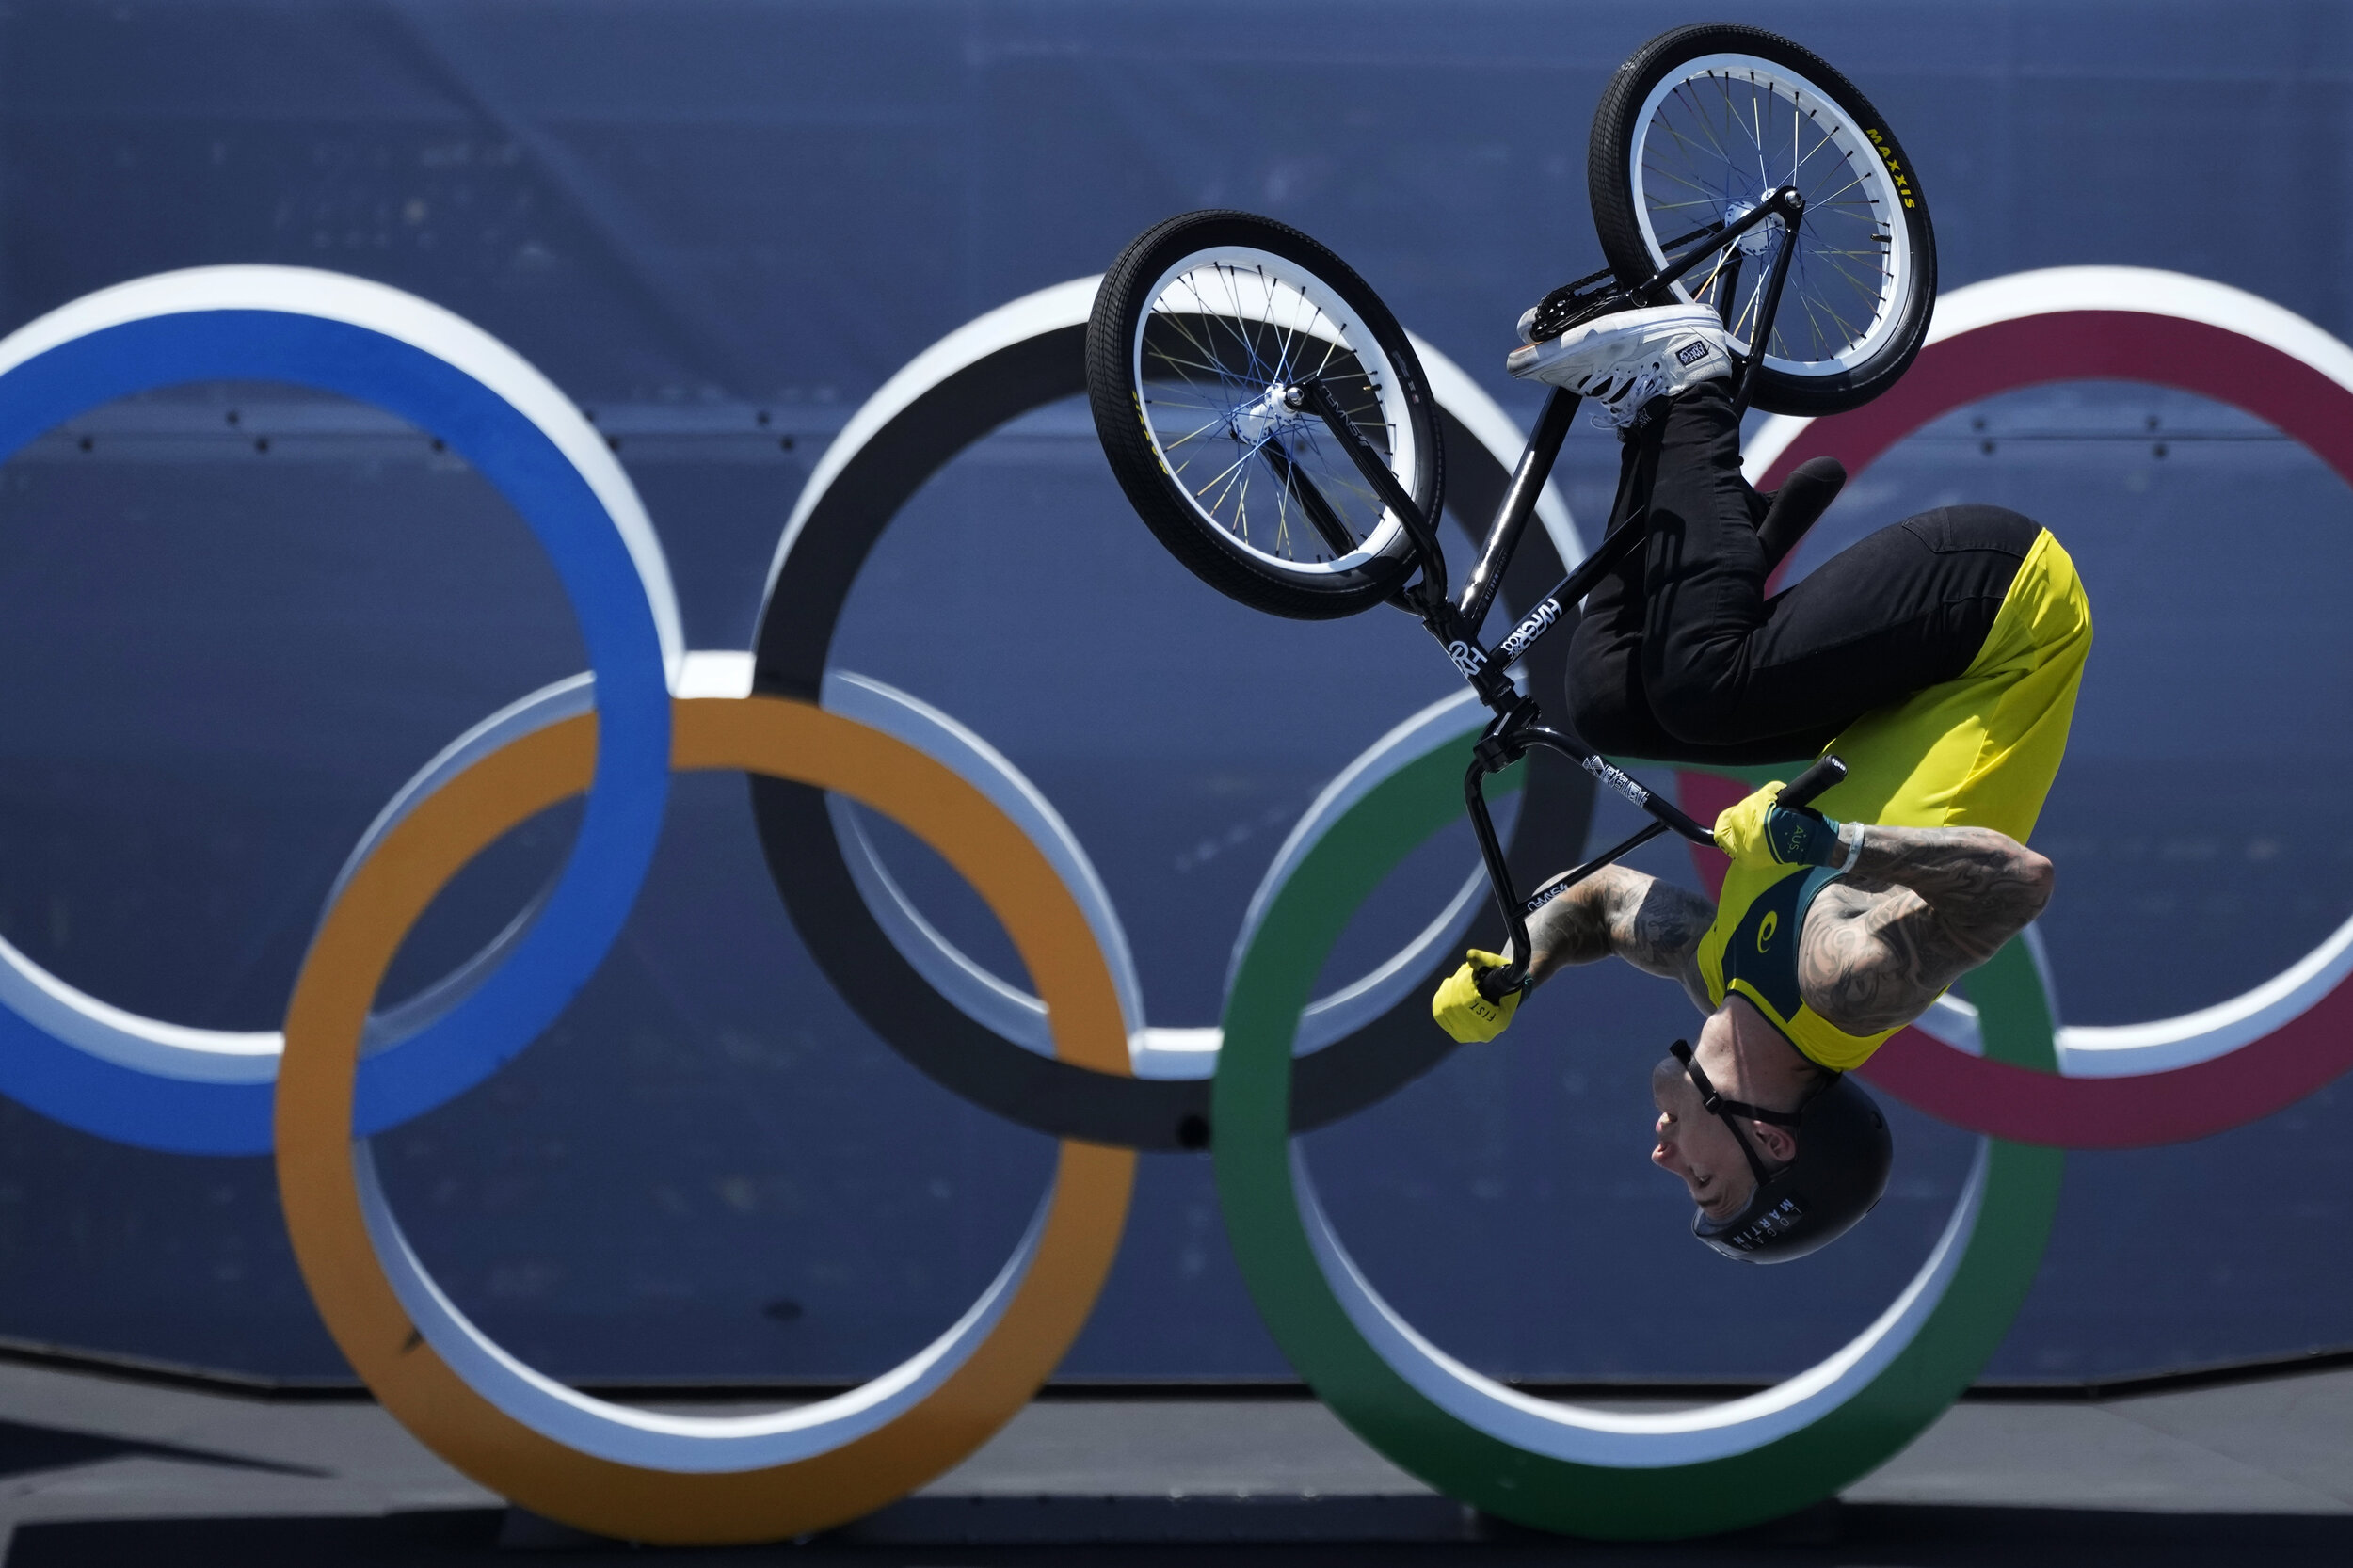  Logan Martin of Australia competes in the men's BMX freestyle final at the 2020 Summer Olympics, Sunday, Aug. 1, 2021, in Tokyo, Japan. (AP Photo/Ben Curtis) 